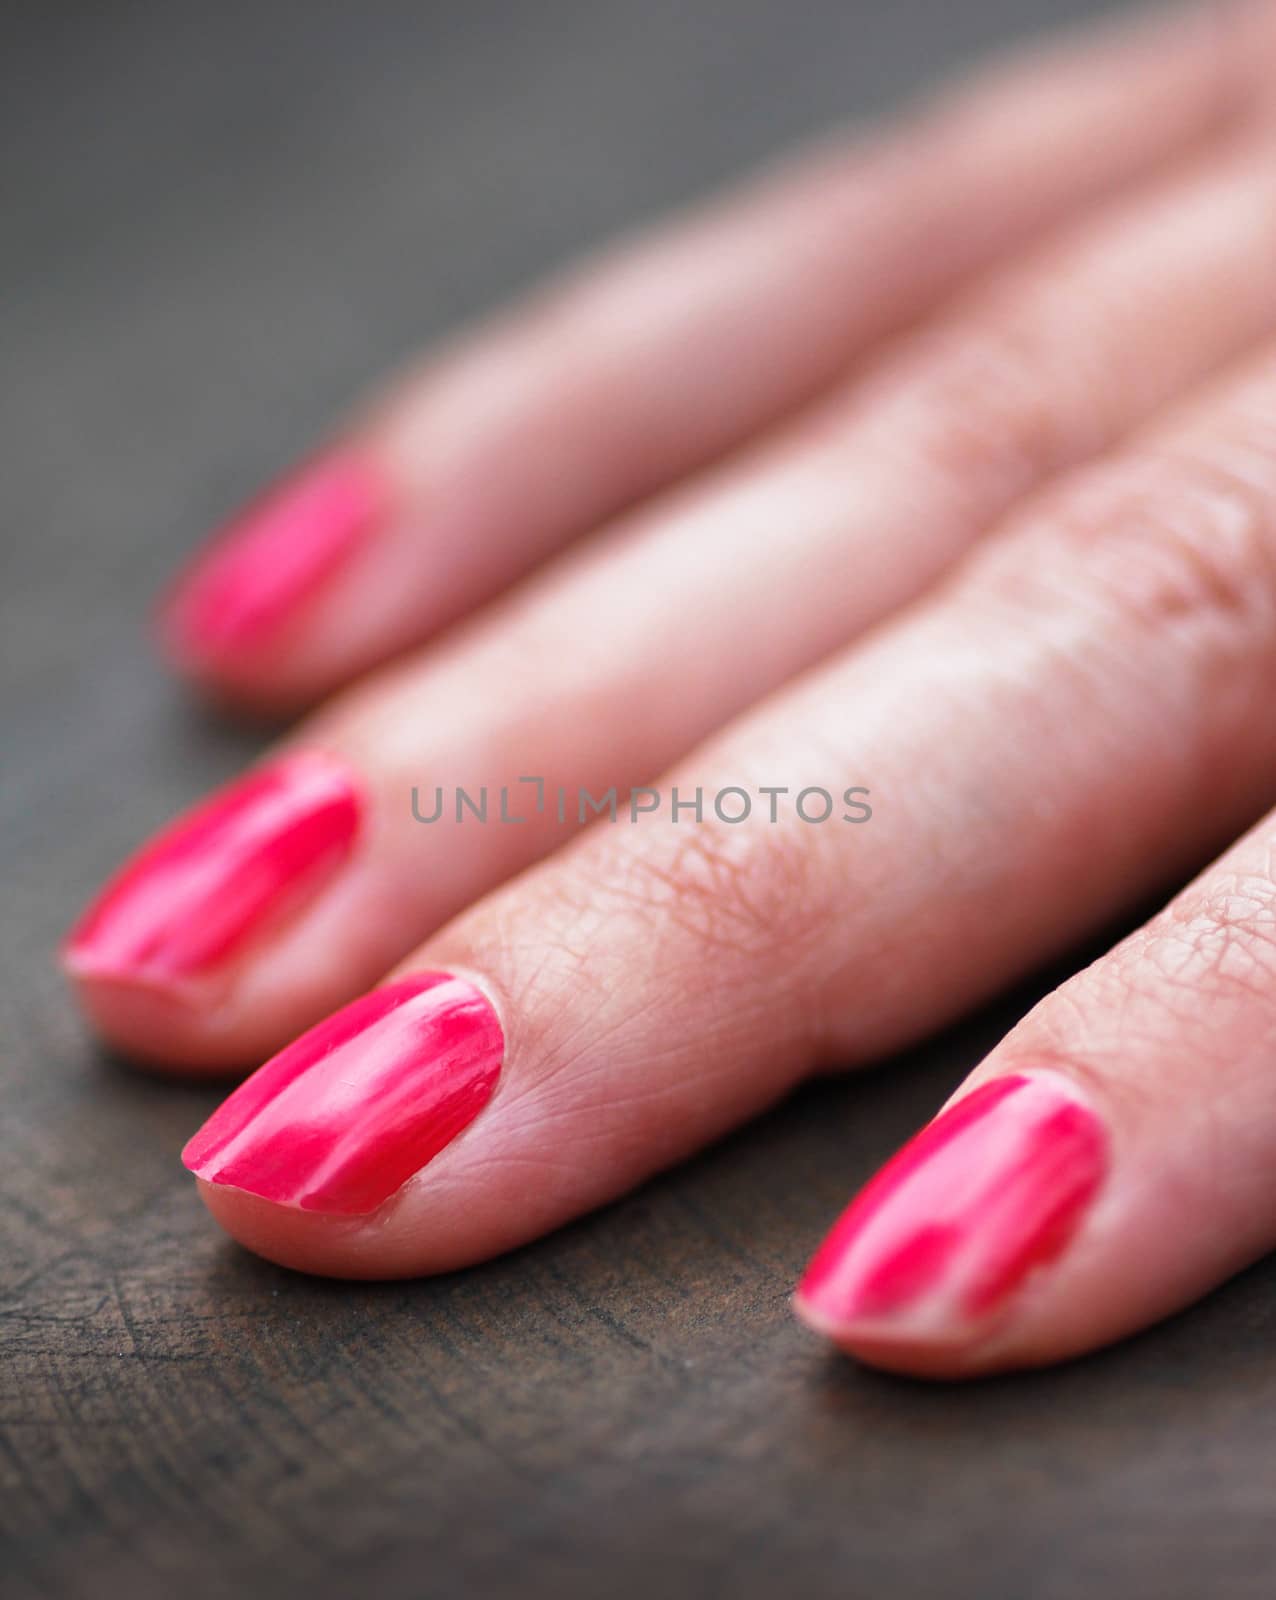 right hand fingers of a caucasian woman with a wooden background